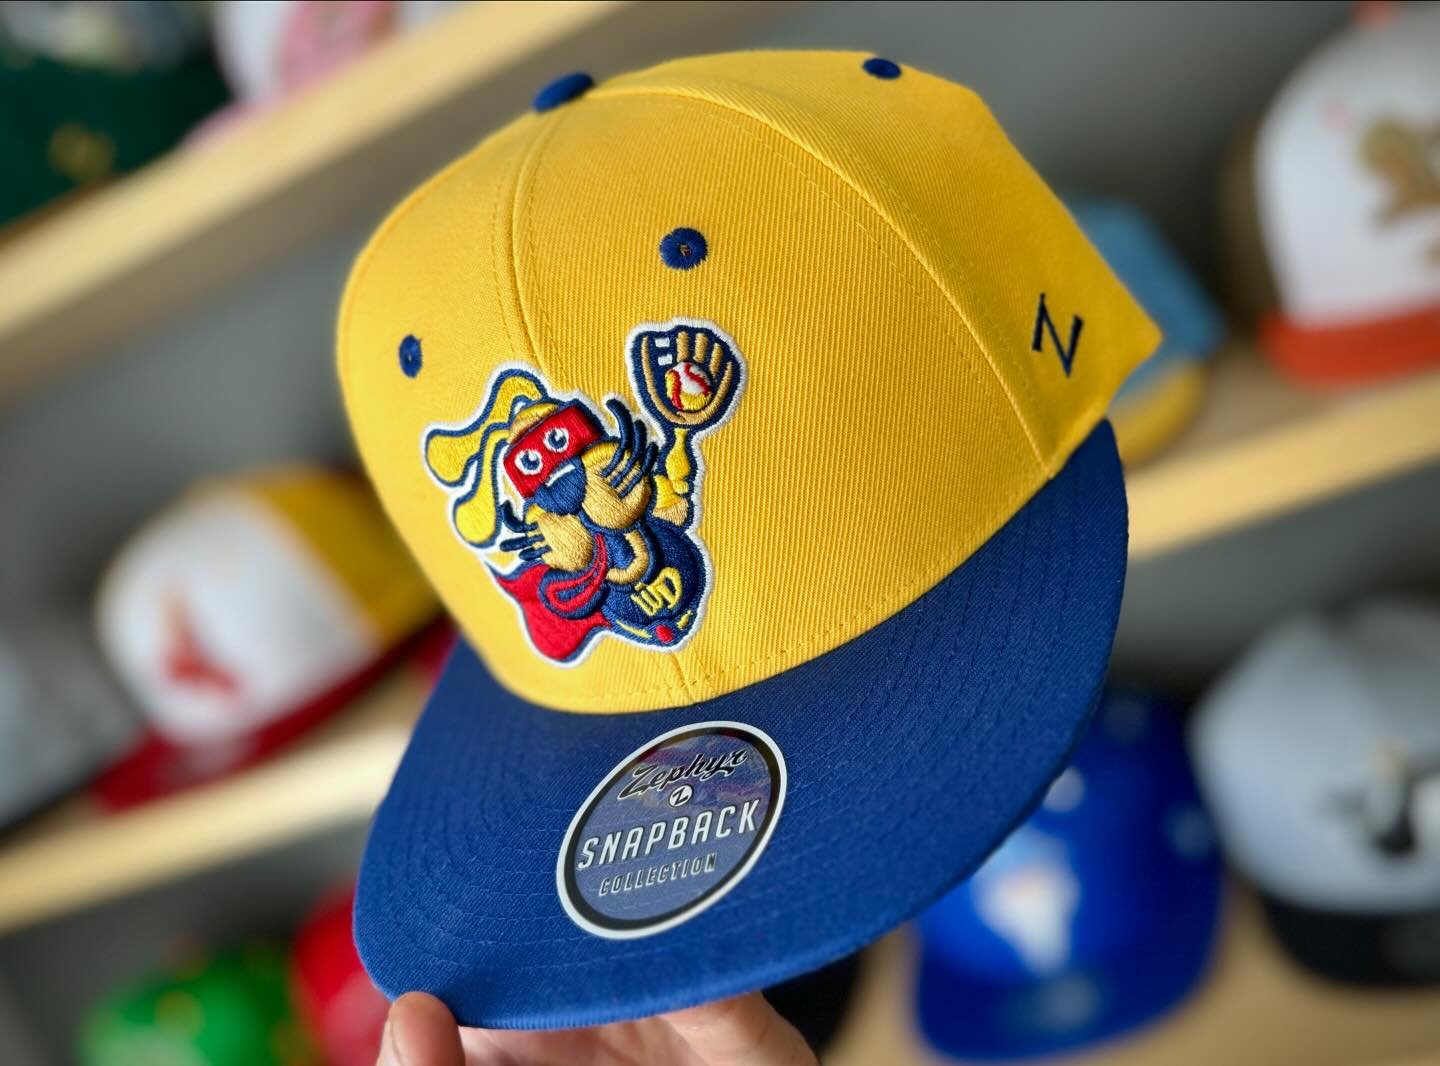 CAMPERS! We just had to spice up the Wonder Dog cap. We just dropped this edit sporting a new royal bill! Who will be on the Wonder Dogs this summer? @zephyrhats